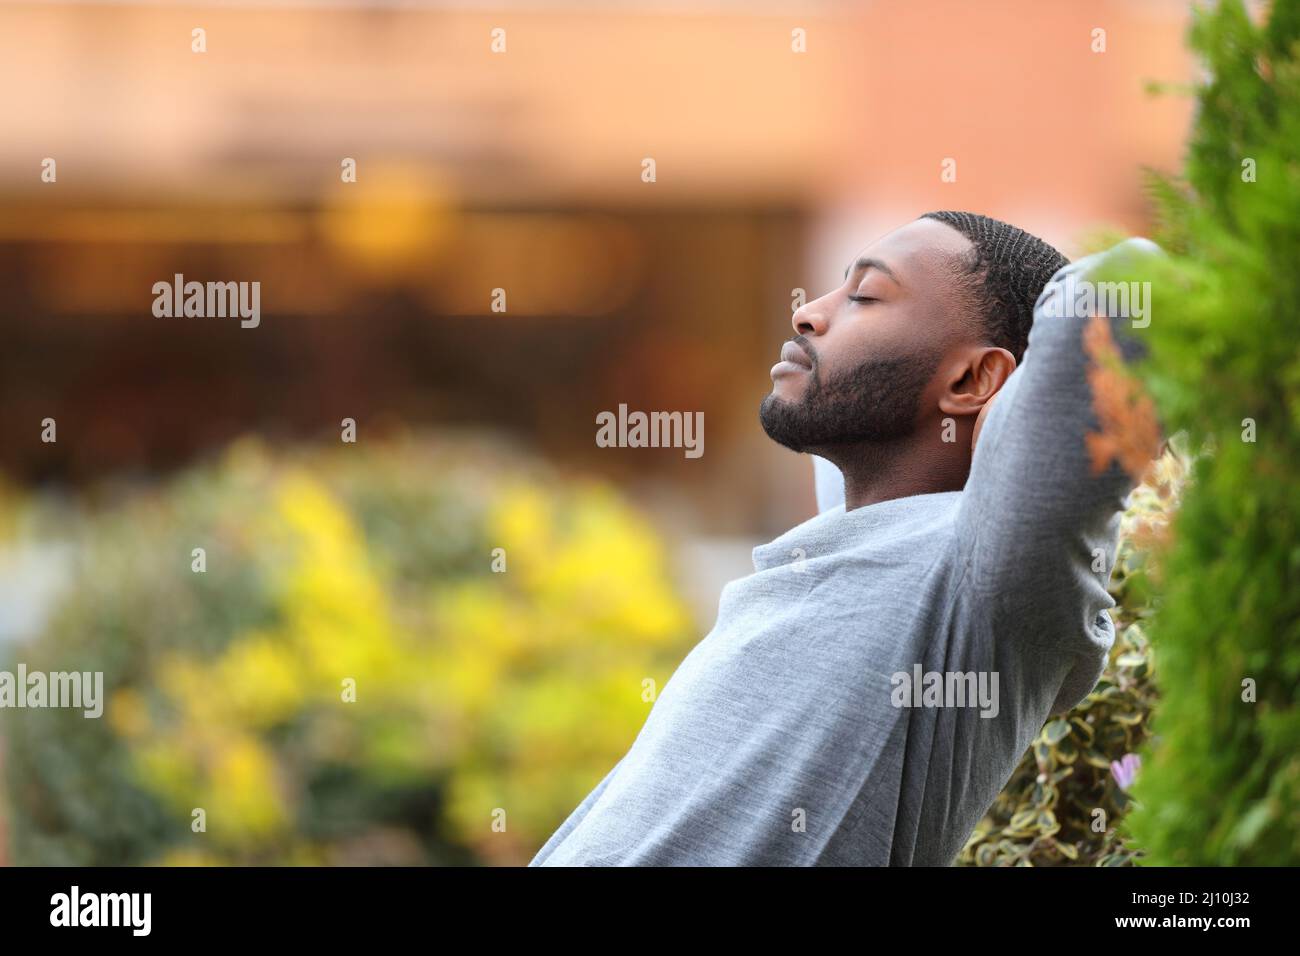 Side vie wportrait of a relaxed man with black skin resting in a park Stock Photo